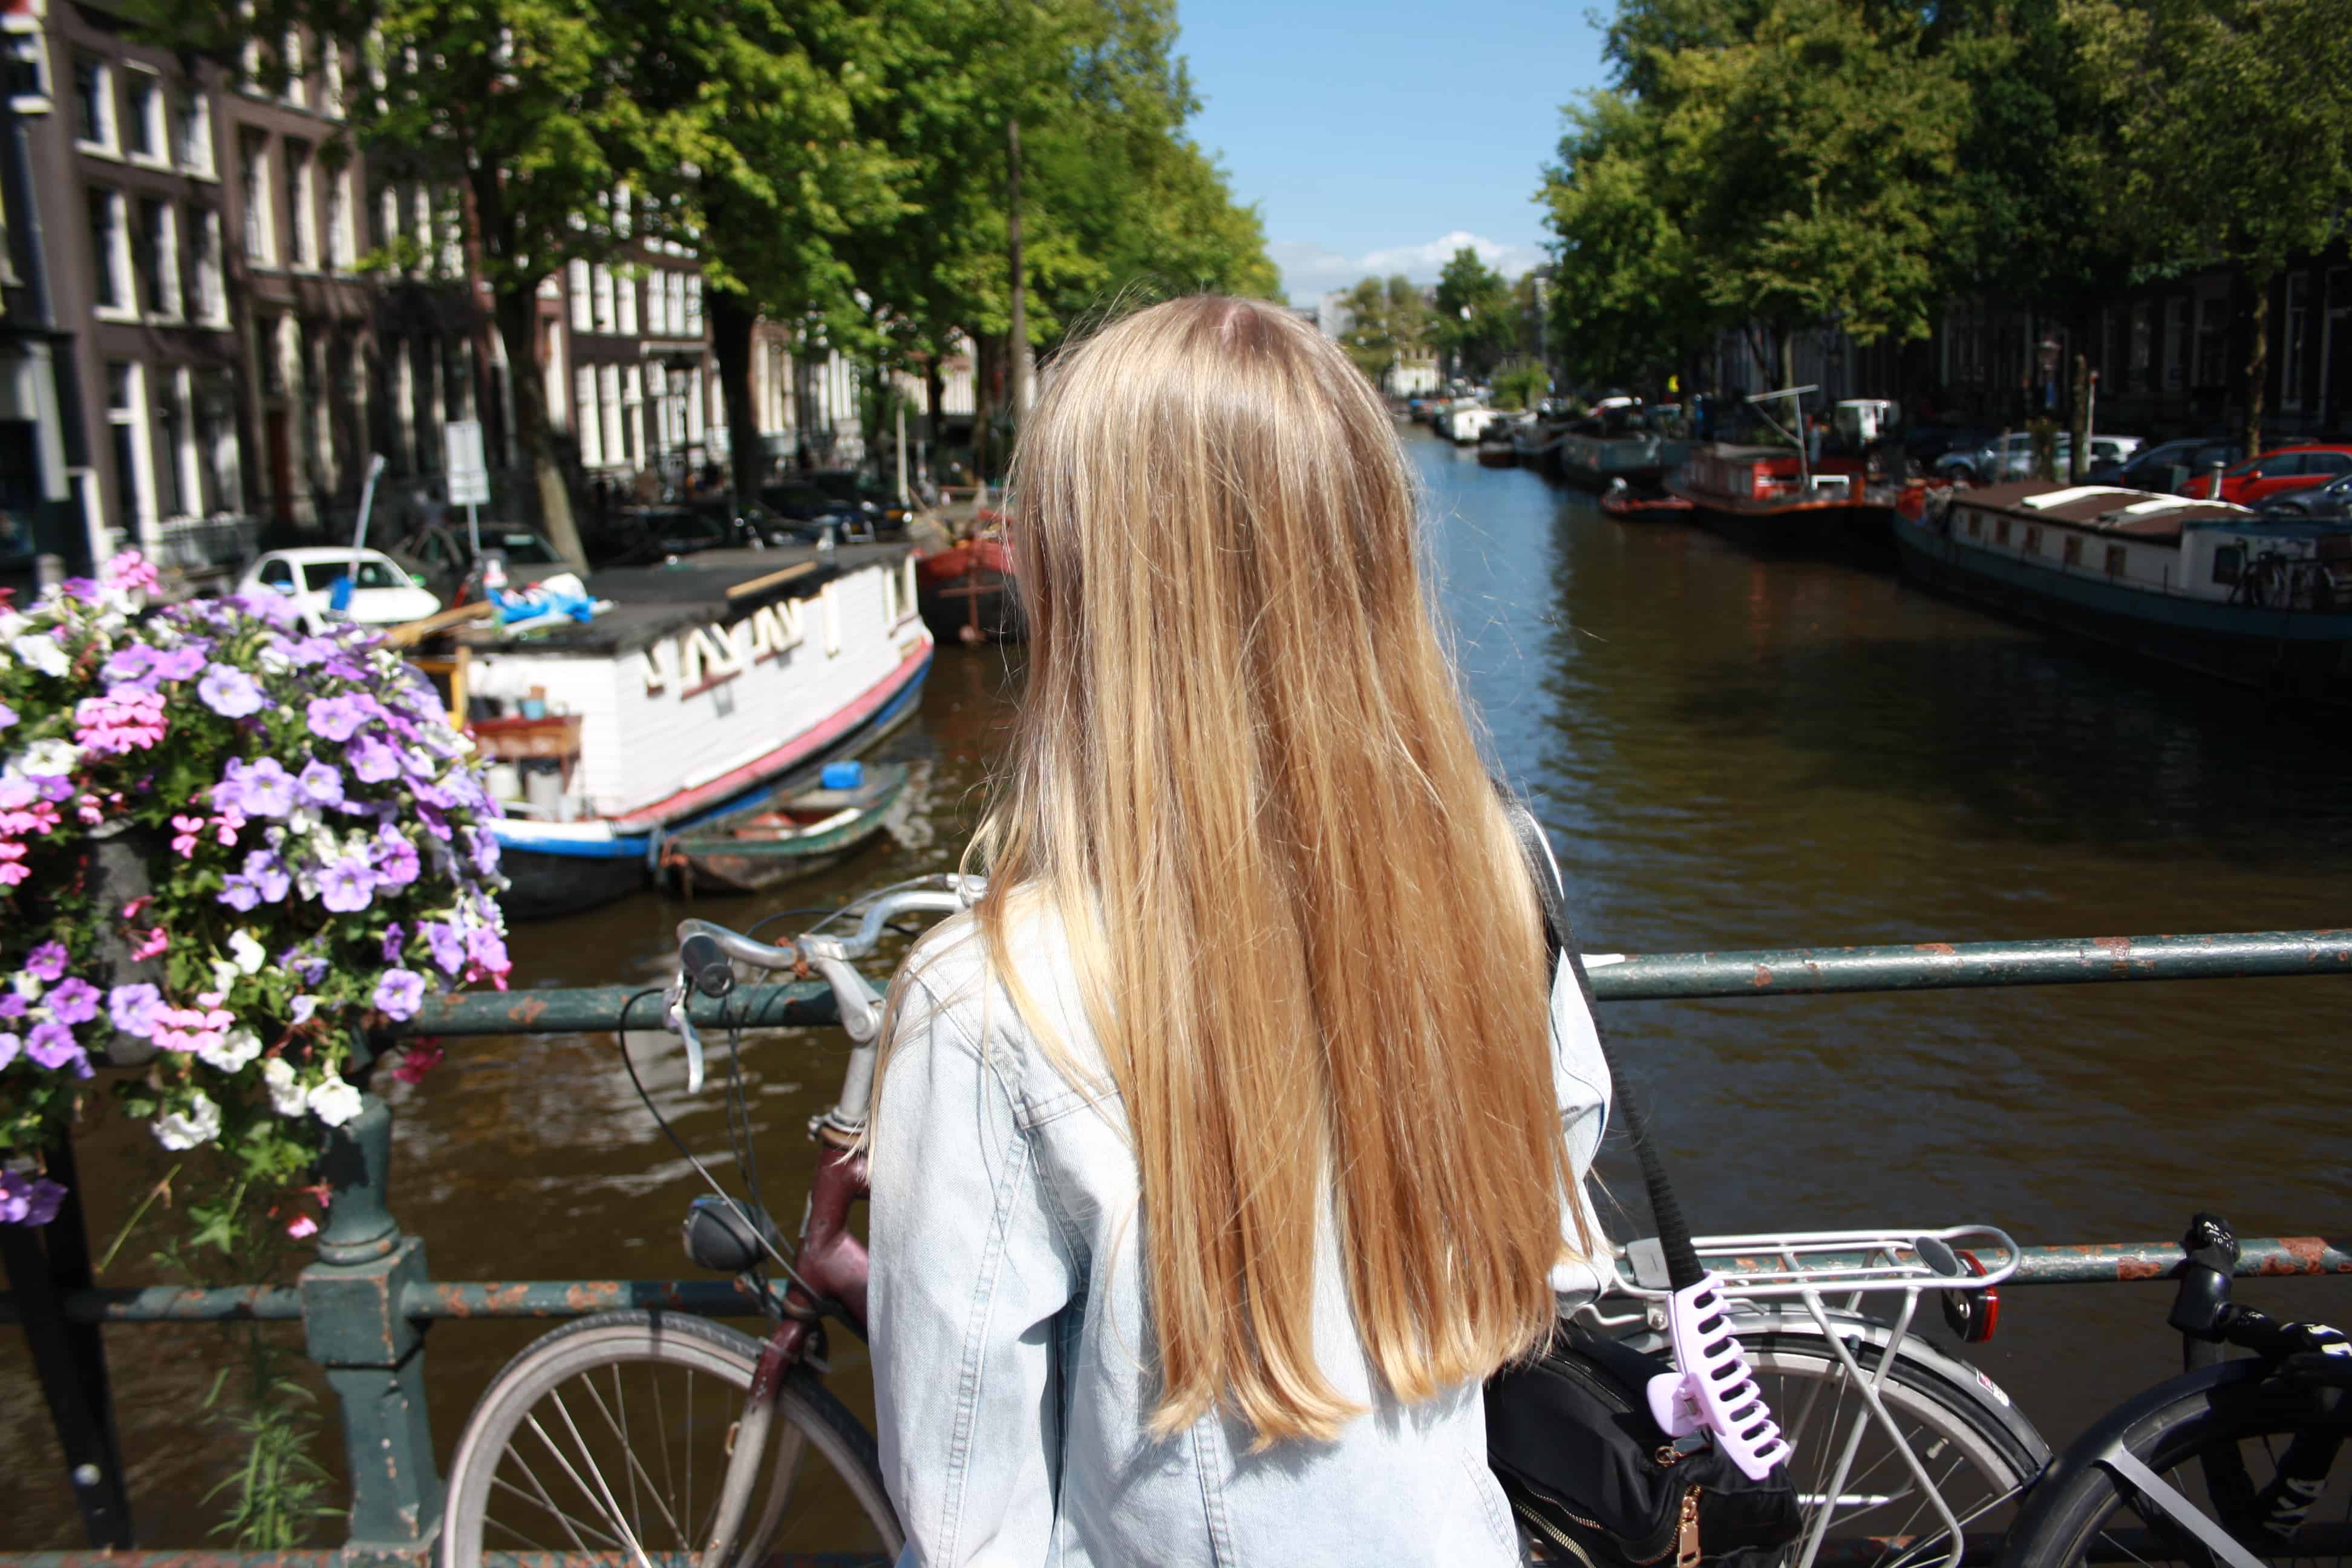 Amsterdam's canals are beautiful and one of the highlights of the city. Girl stands on bridge overlooking the canal.